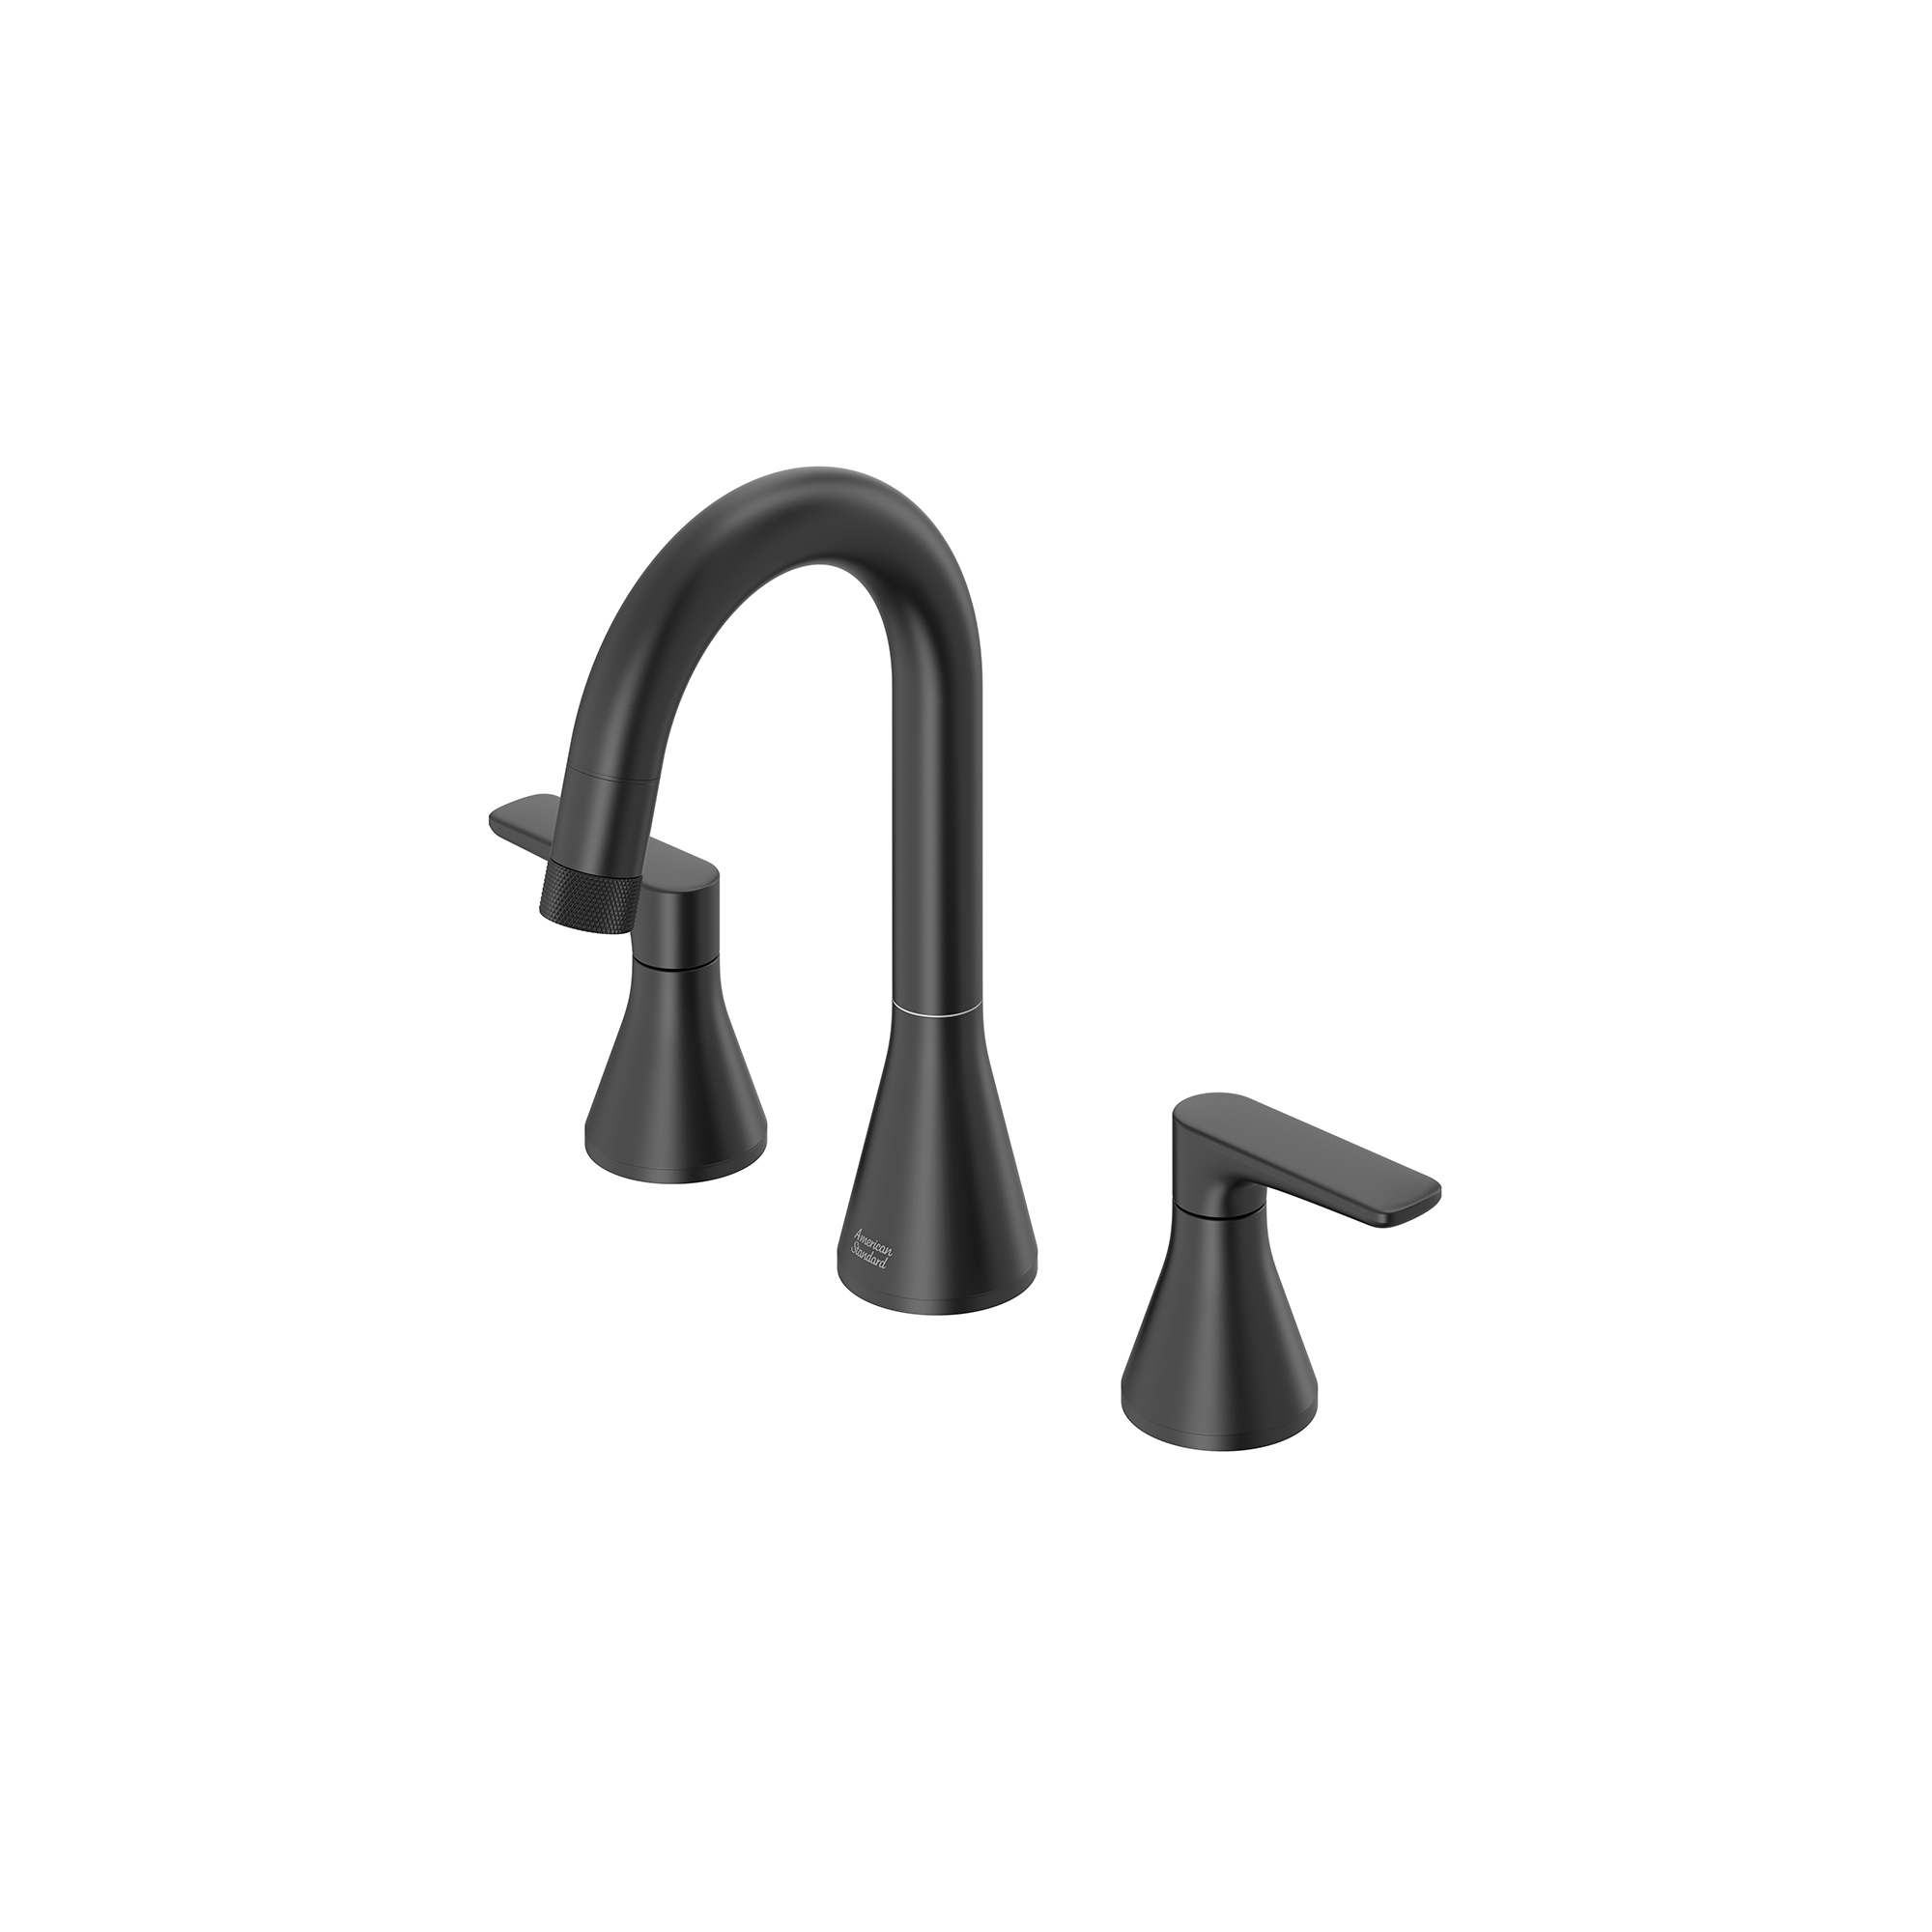 Aspirations™ 8-Inch Widespread 2-Handle Pull-Down Bathroom Faucet 1.2 gpm/4.5 L/min With Lever Handles